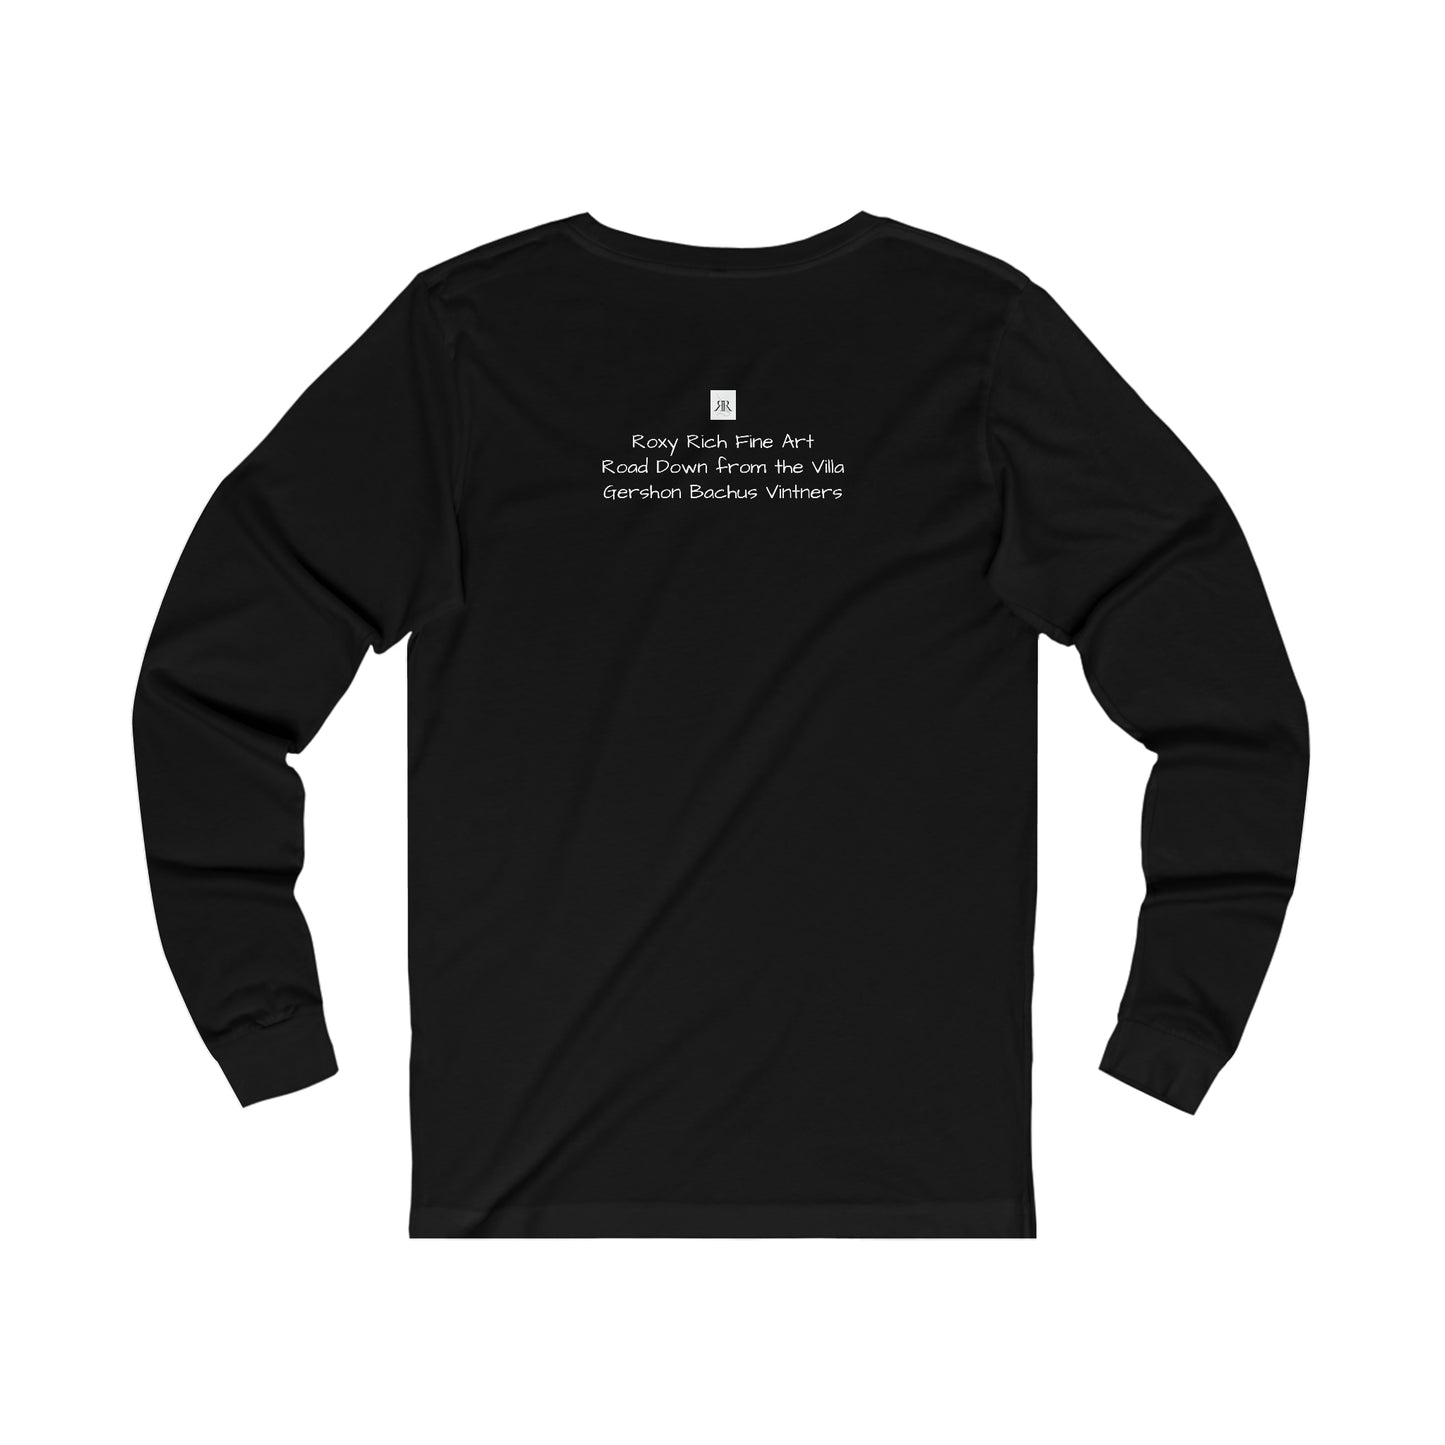 Road Down from the Villa at GBV Unisex Jersey Long Sleeve Tee